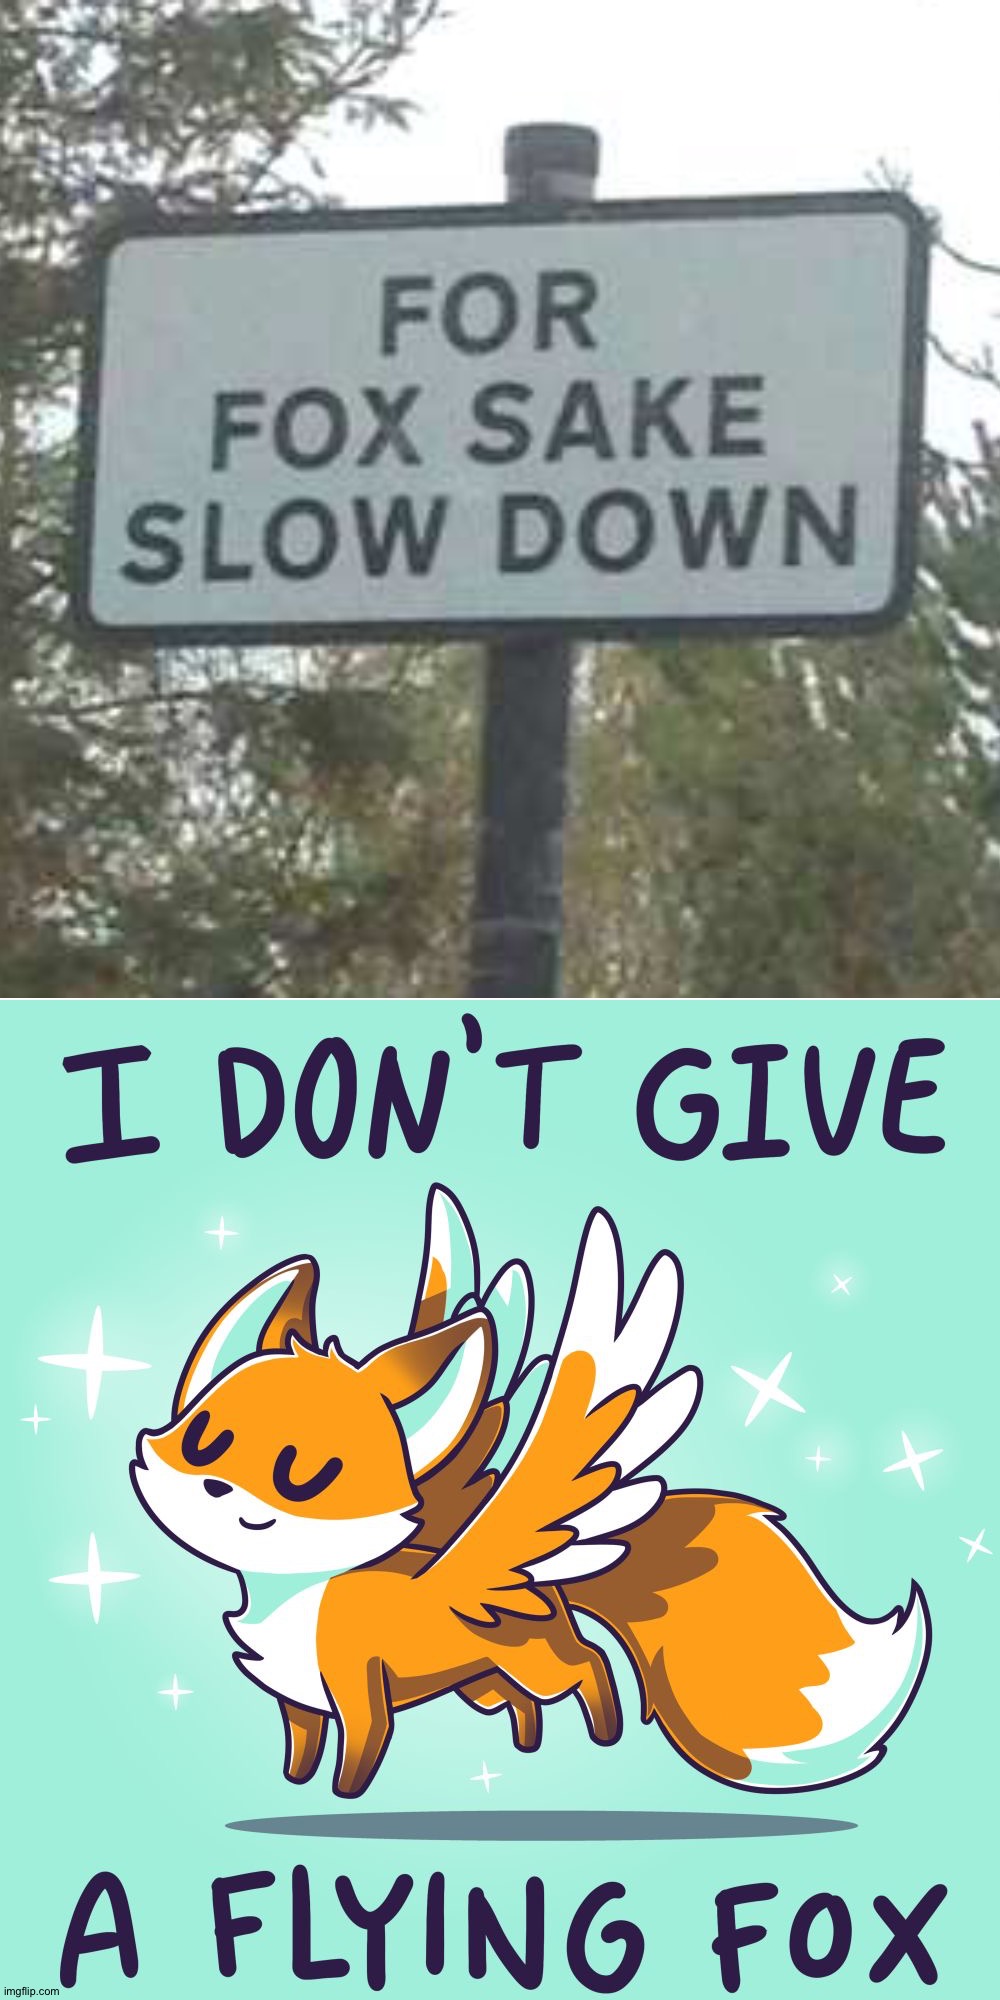 That's just foxing nuts. What the fox? | image tagged in memes,blank transparent square,funny,funny memes,stupid signs,dank memes | made w/ Imgflip meme maker